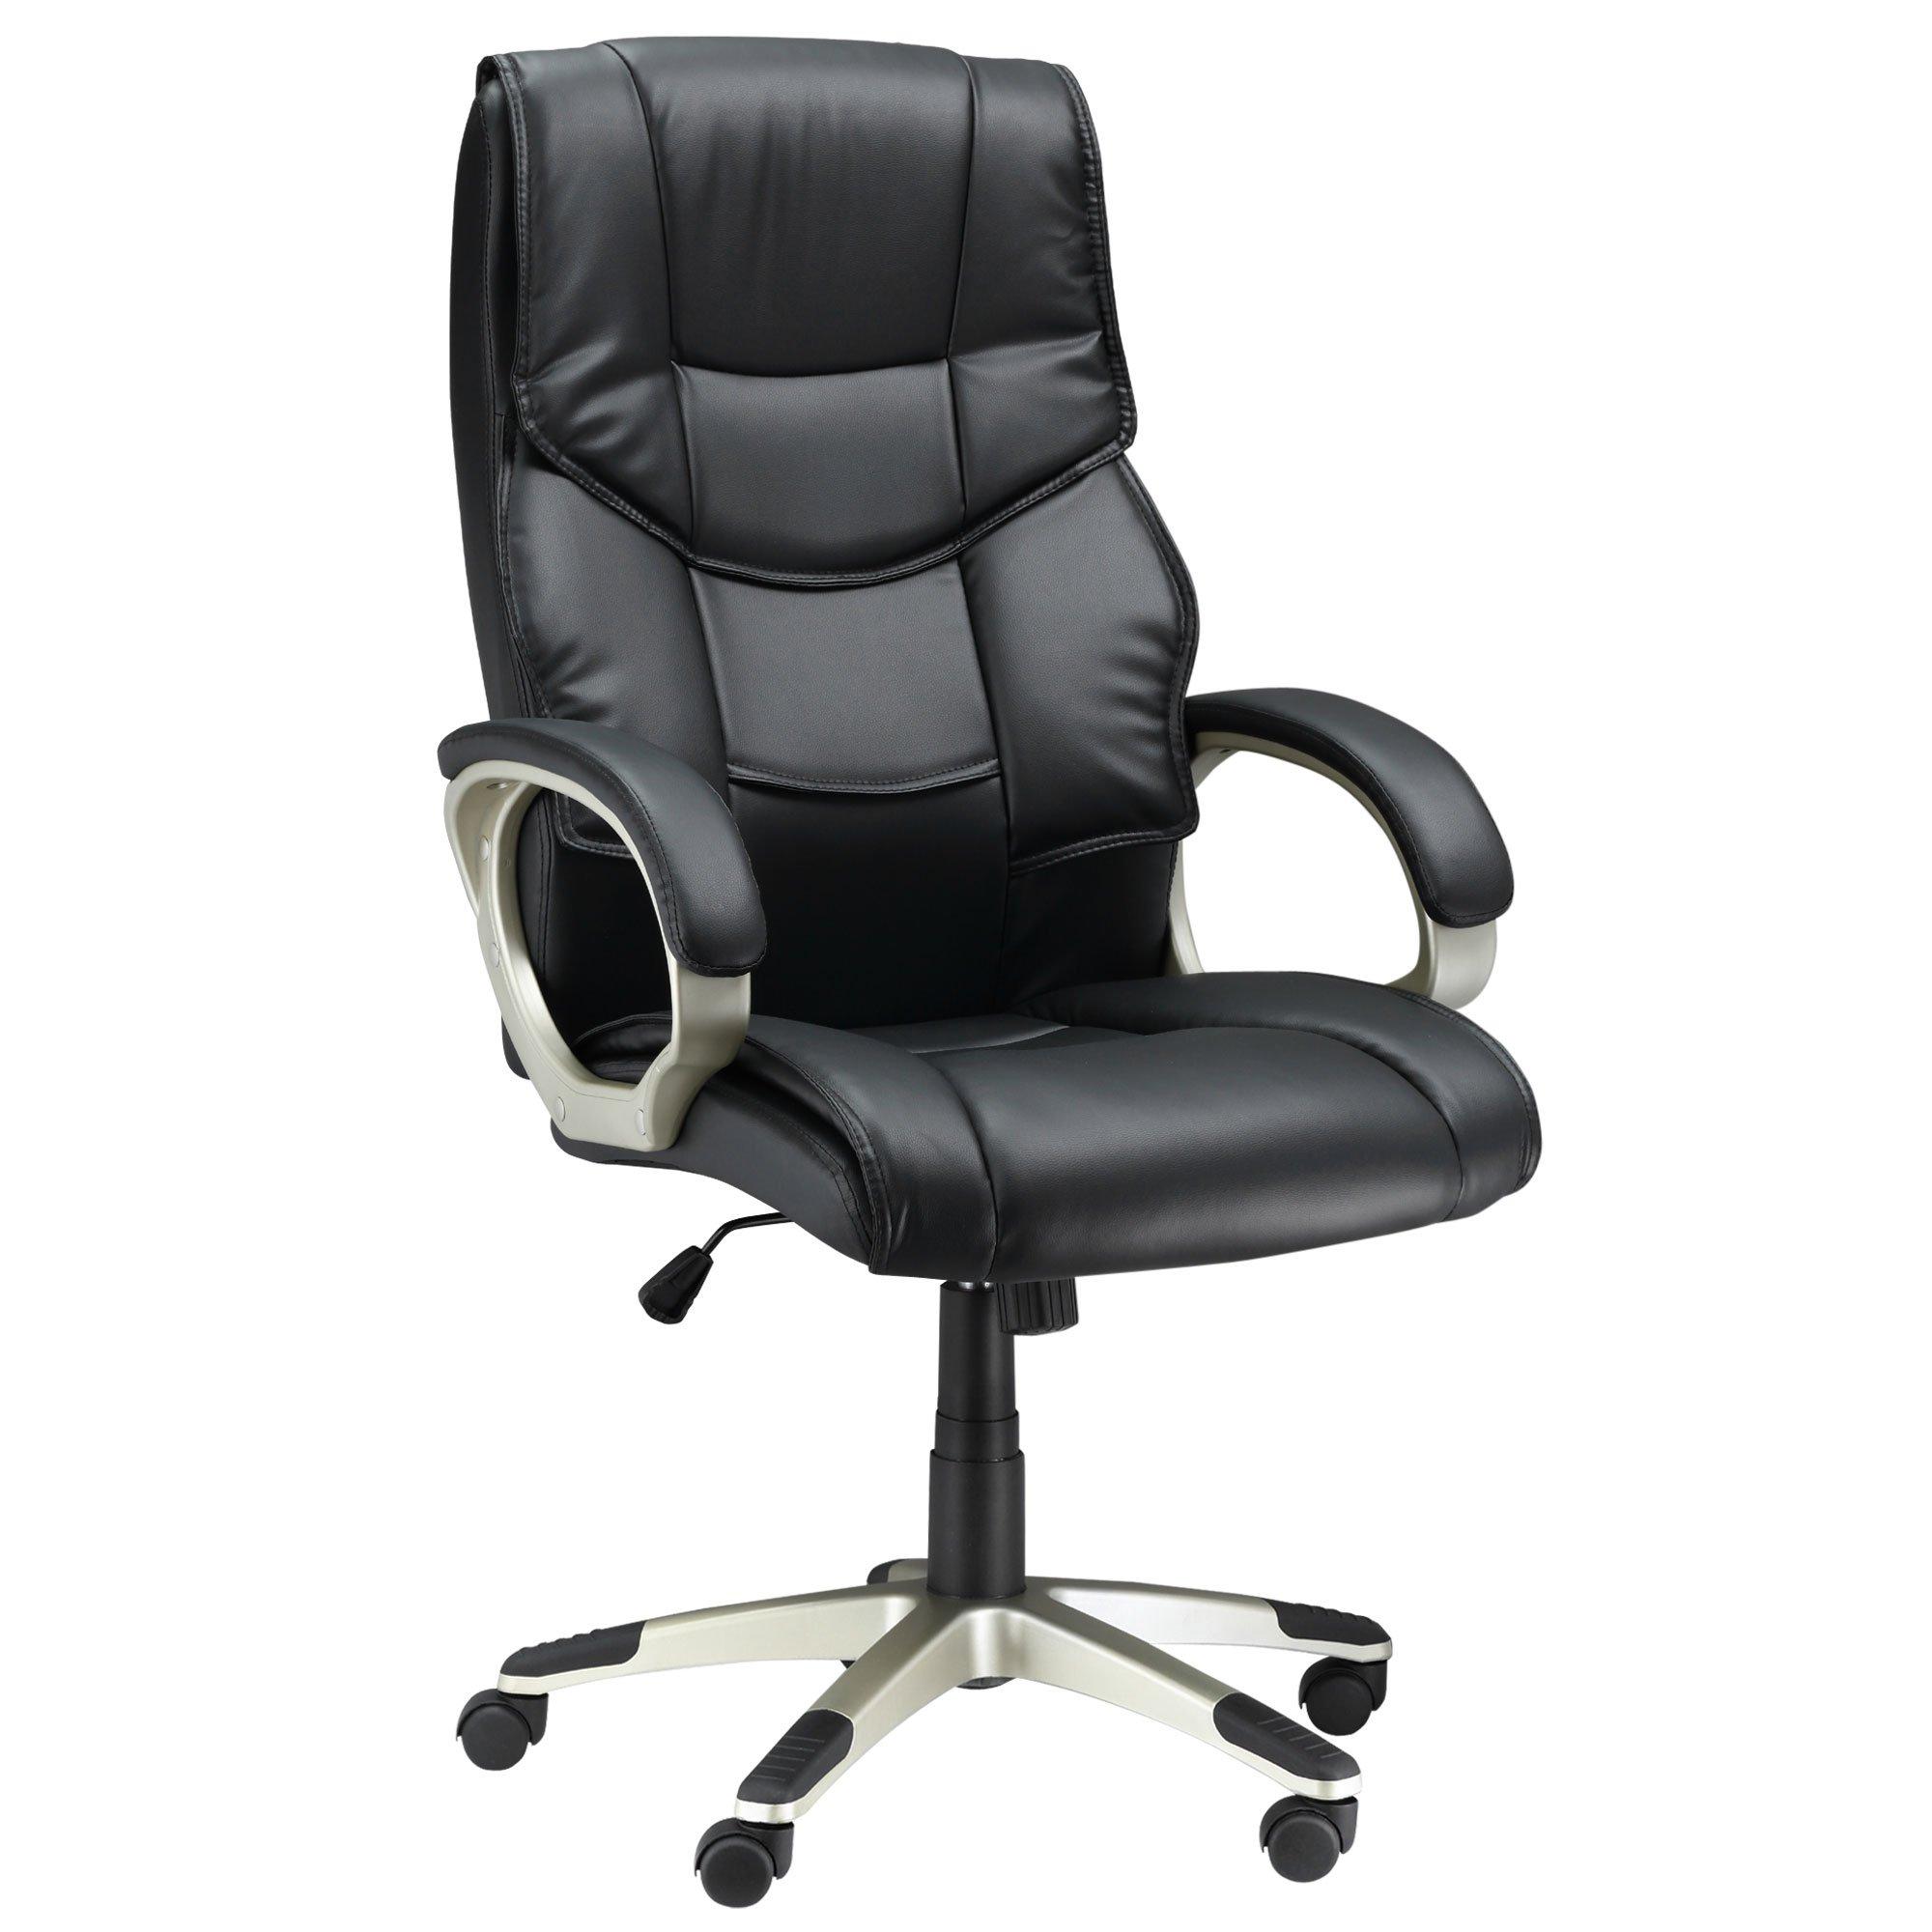 Executive Computer Office Desk Chair High Back Faux Leather